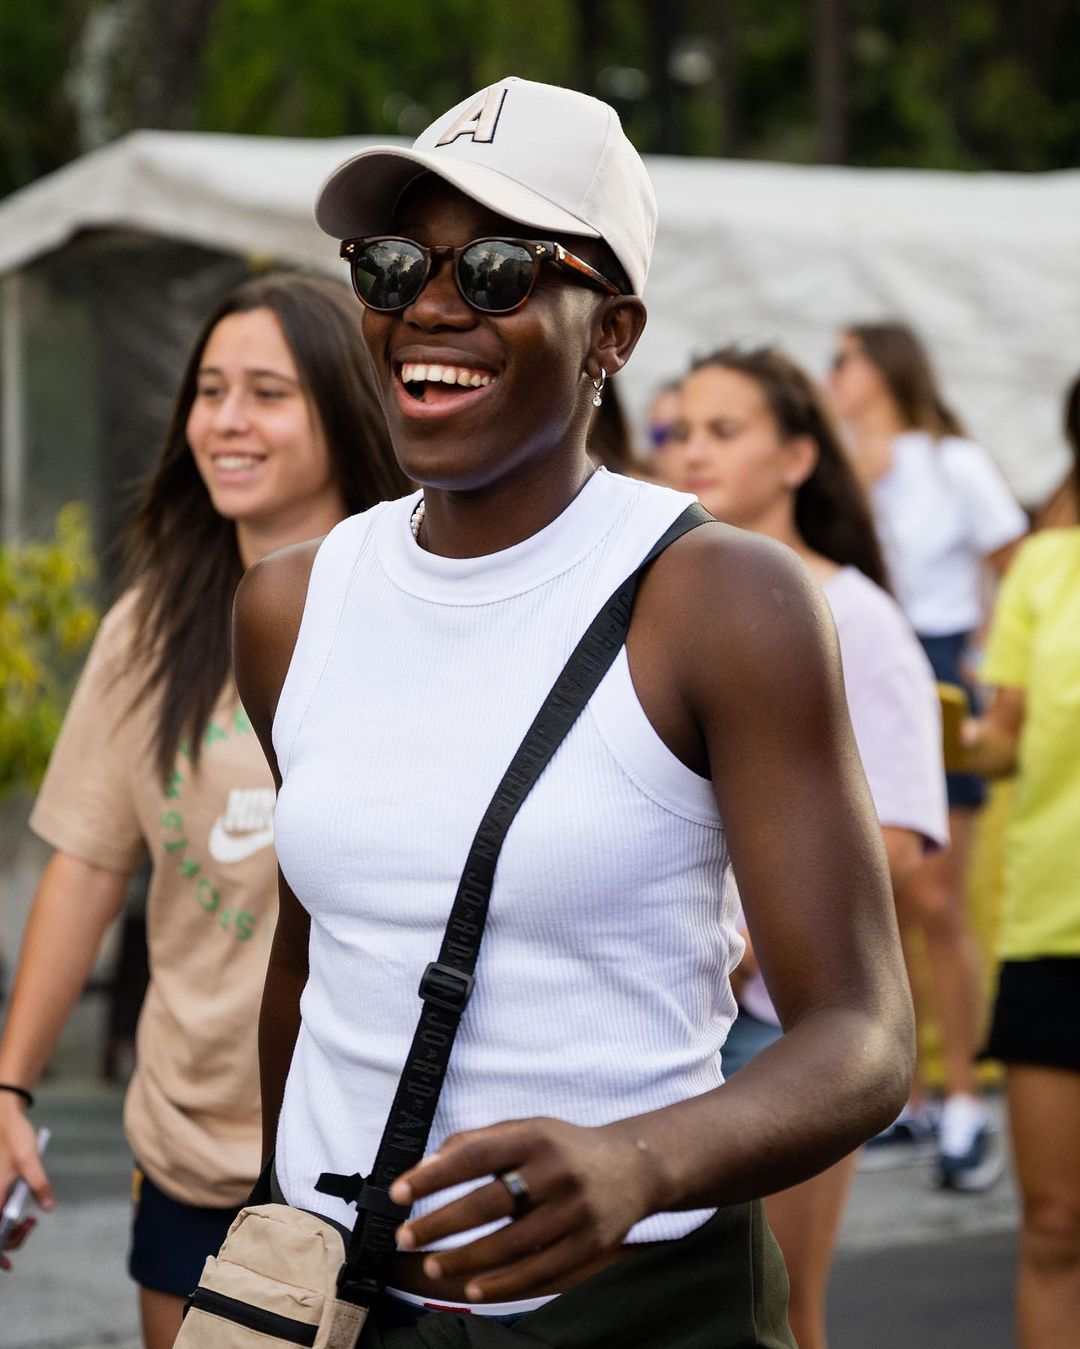 Wearing an armless shirt to go with a face cap Oshoala showed off her style with teammates on a merry-go-round. Image Credit - Twitter/Barcelona Femeni